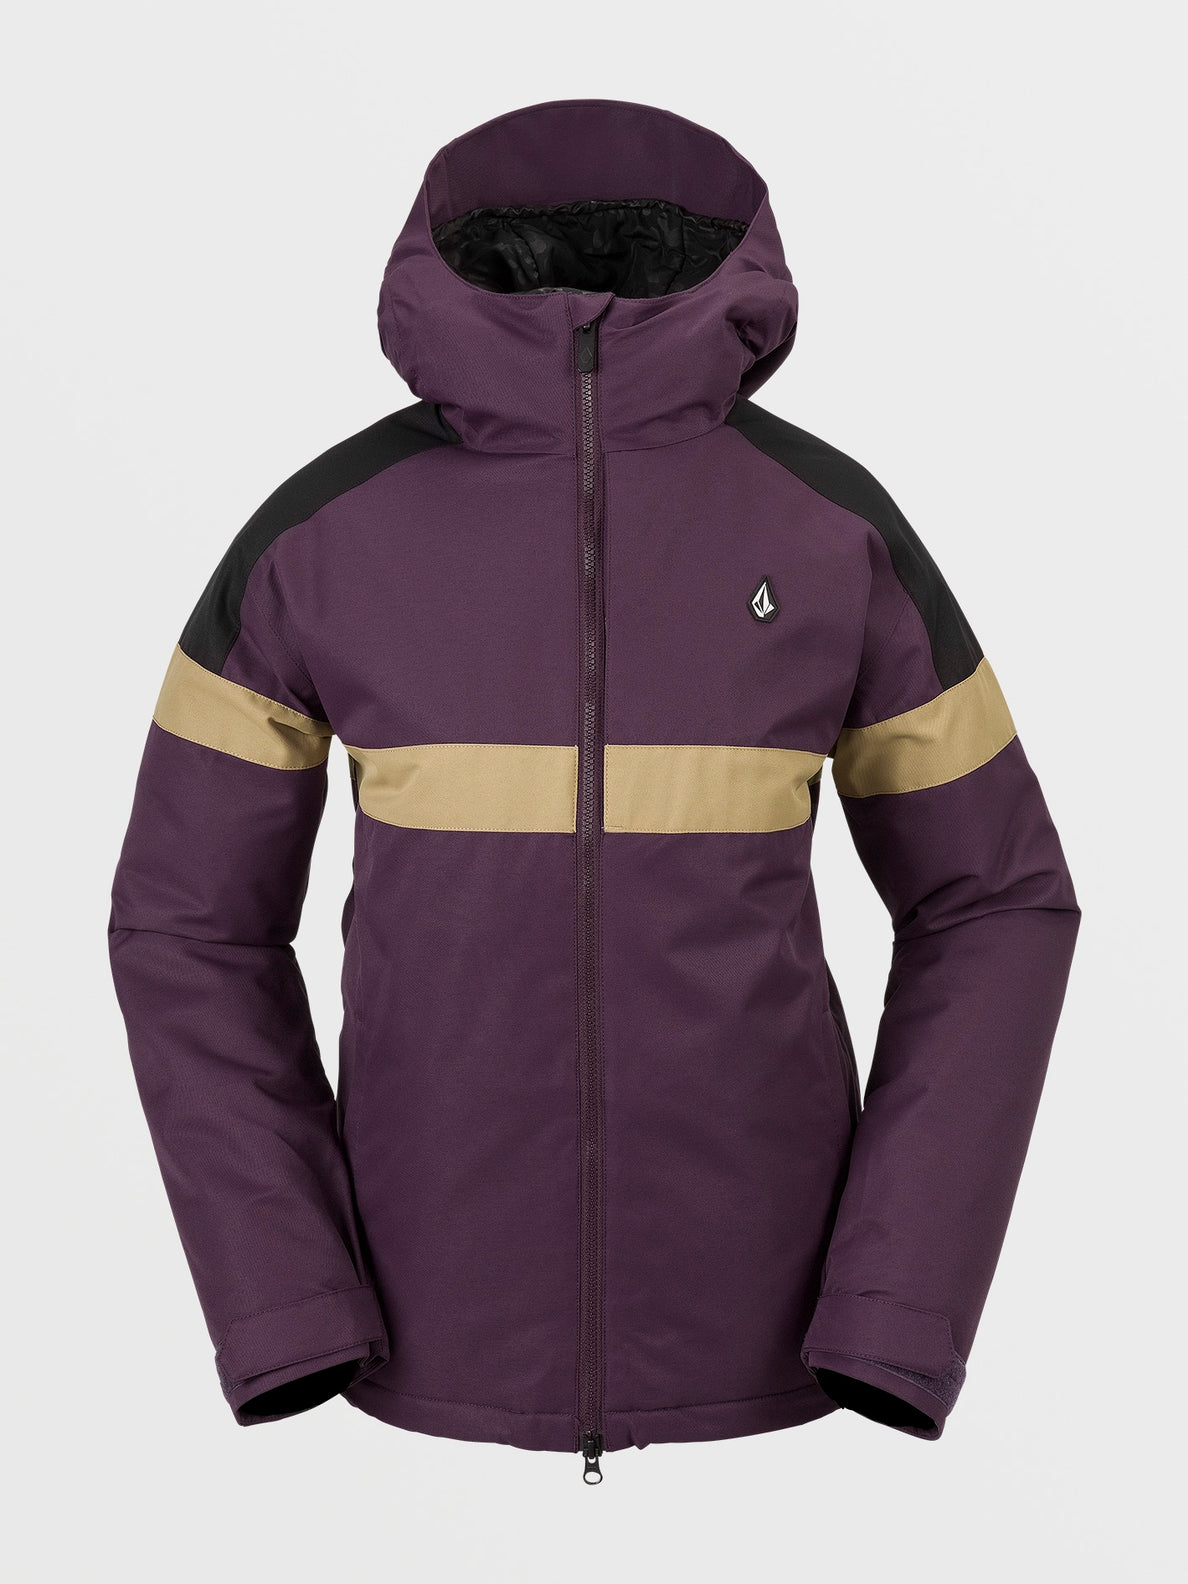 Womens Lindy Insulated Jacket - Blackberry (H0452411_BRY) [F]